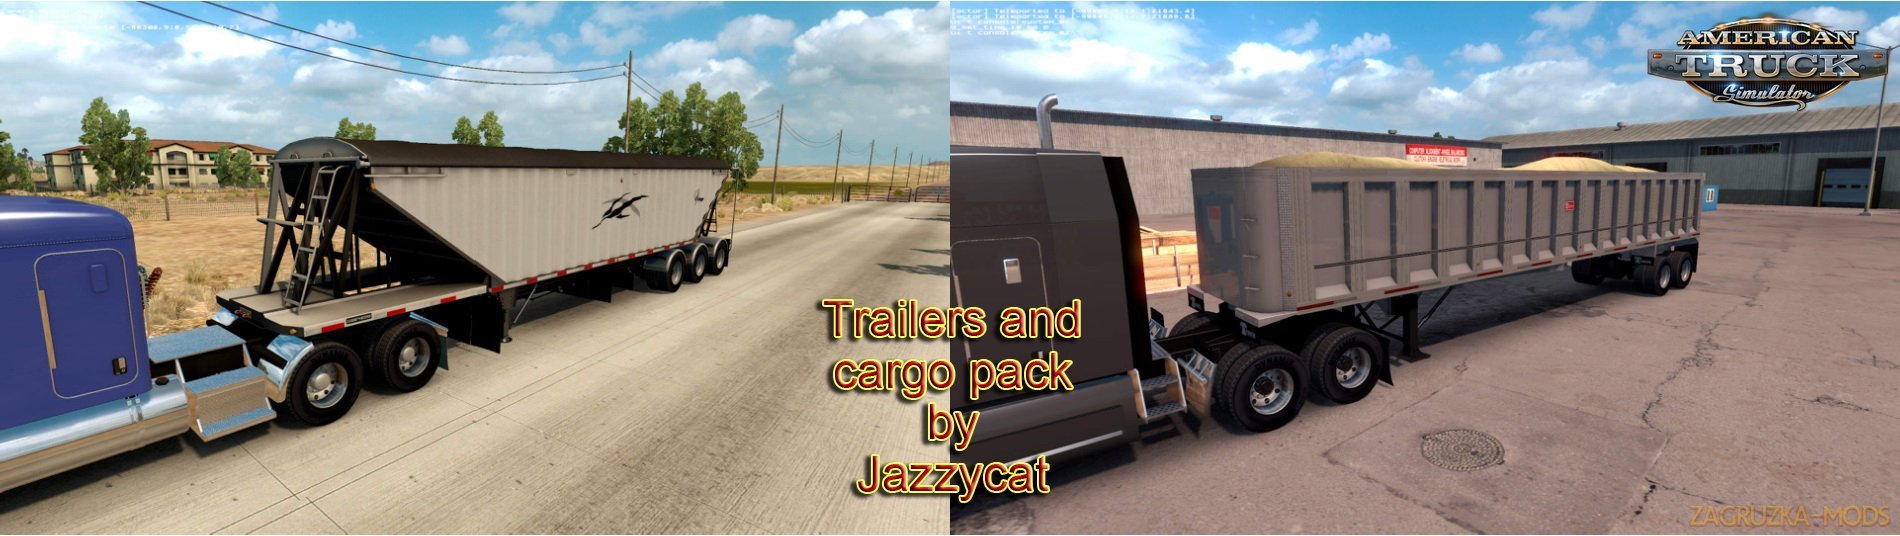 Trailers and Cargo Pack v1.4 by Jazzycat for Ats